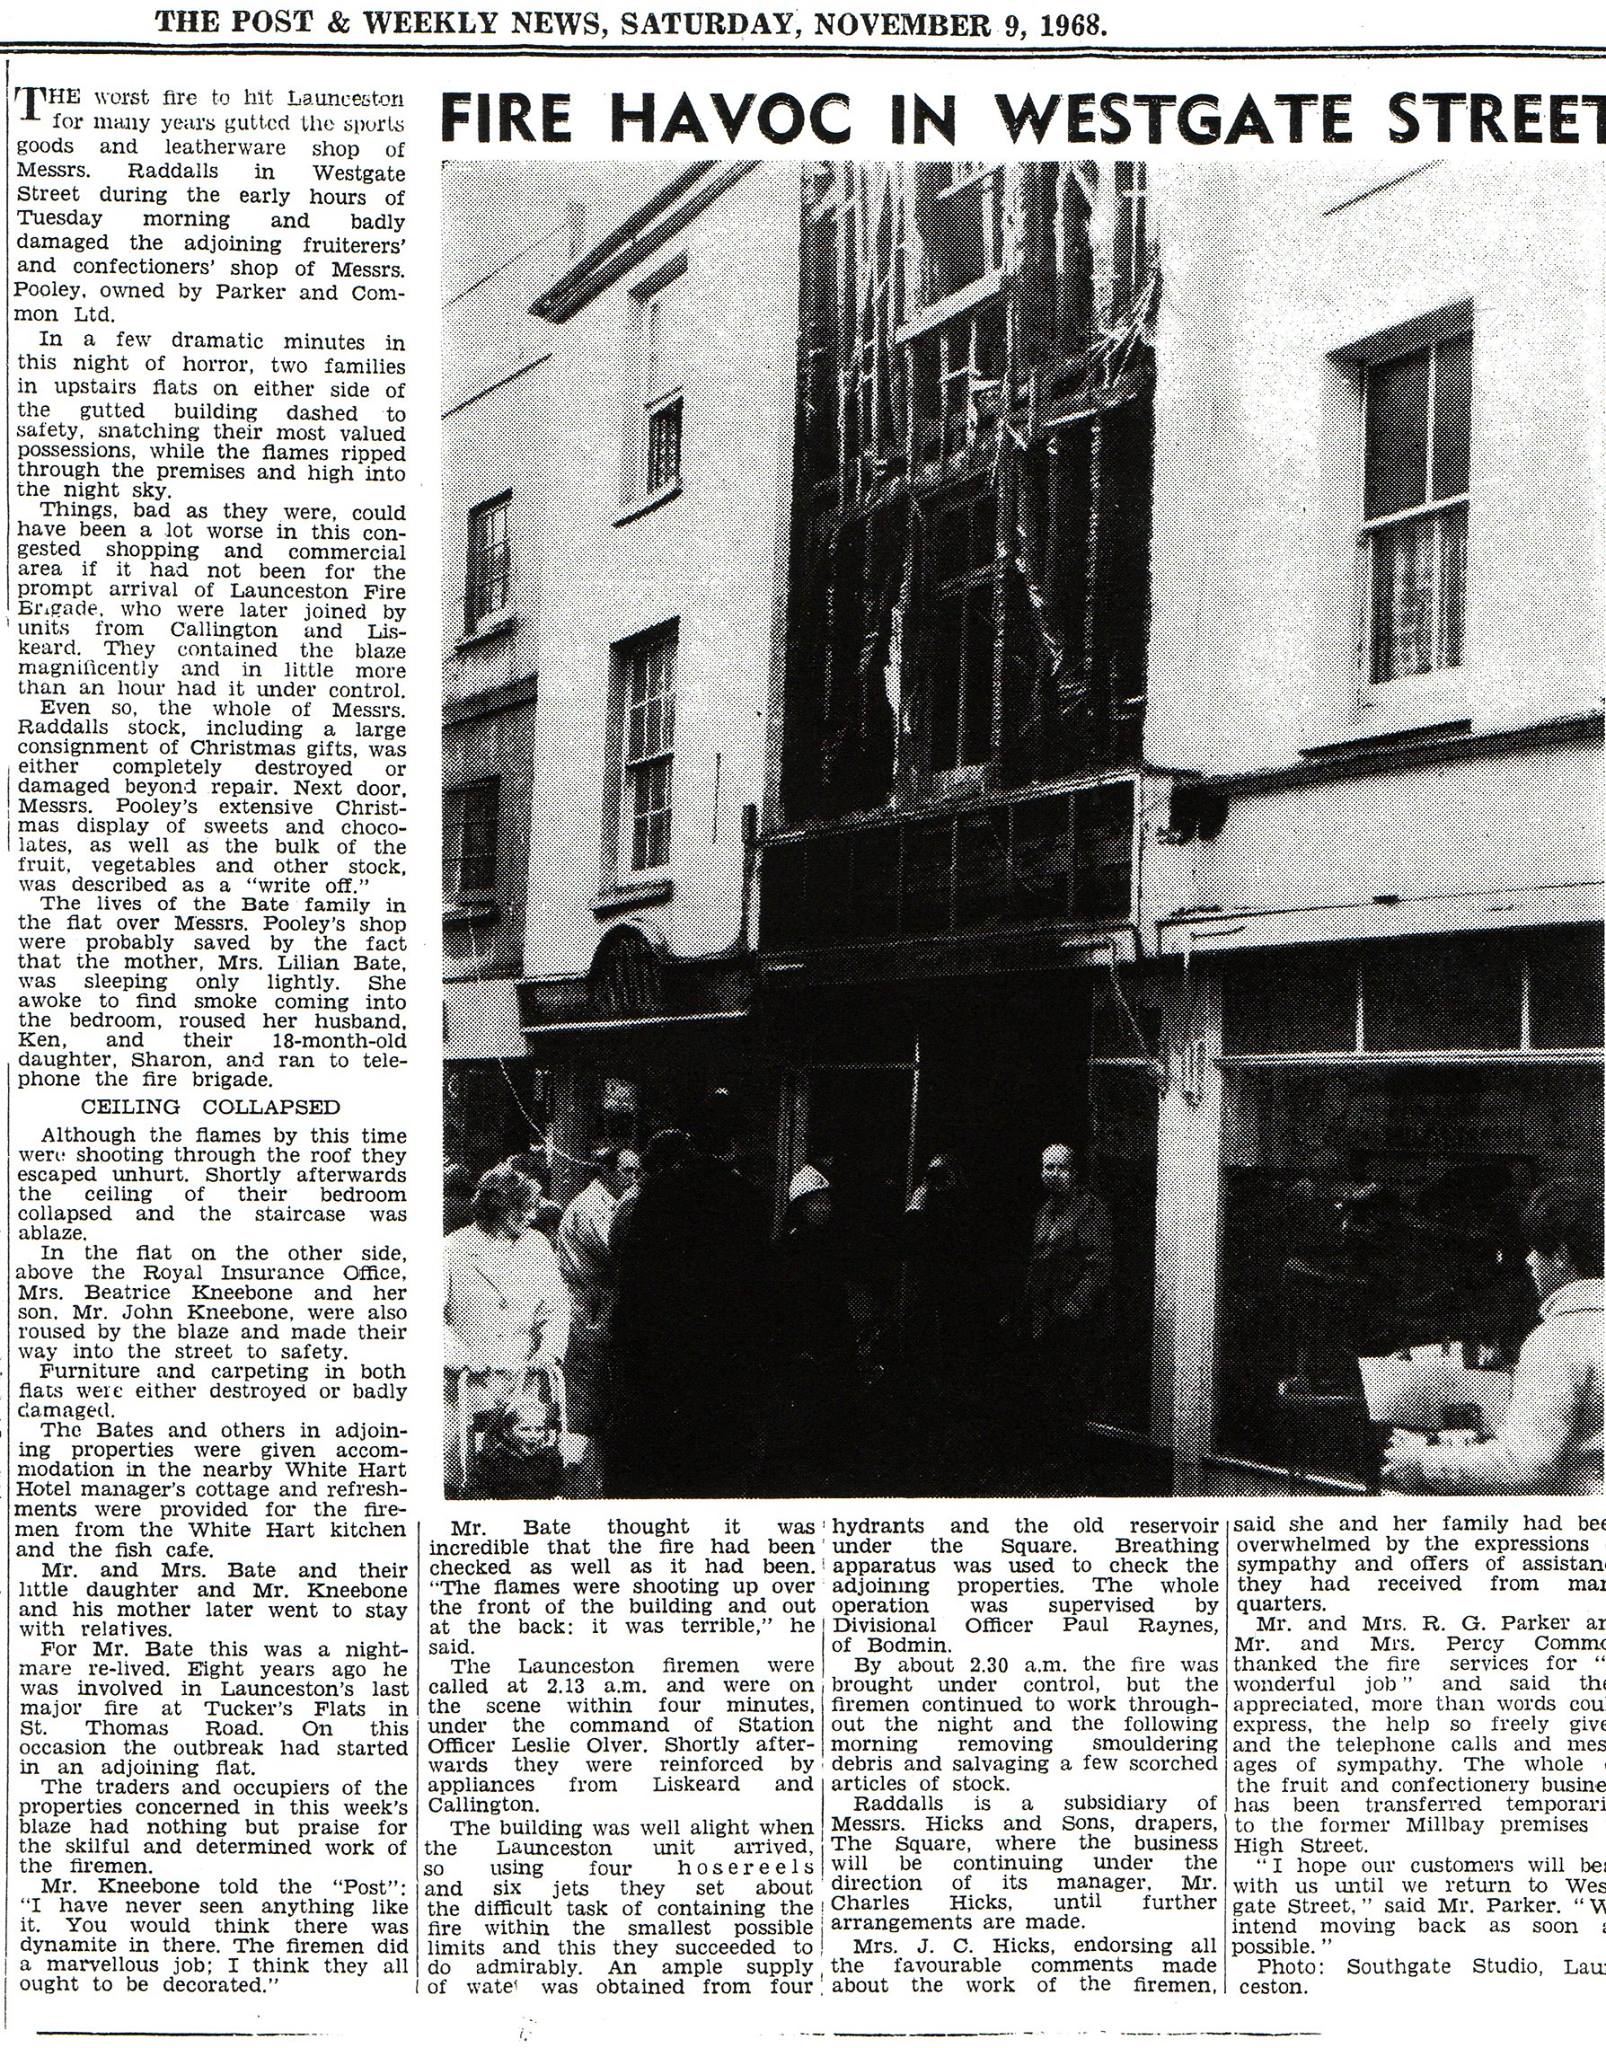 Article on the Raddalls fire in Westgate Street in November 1968.